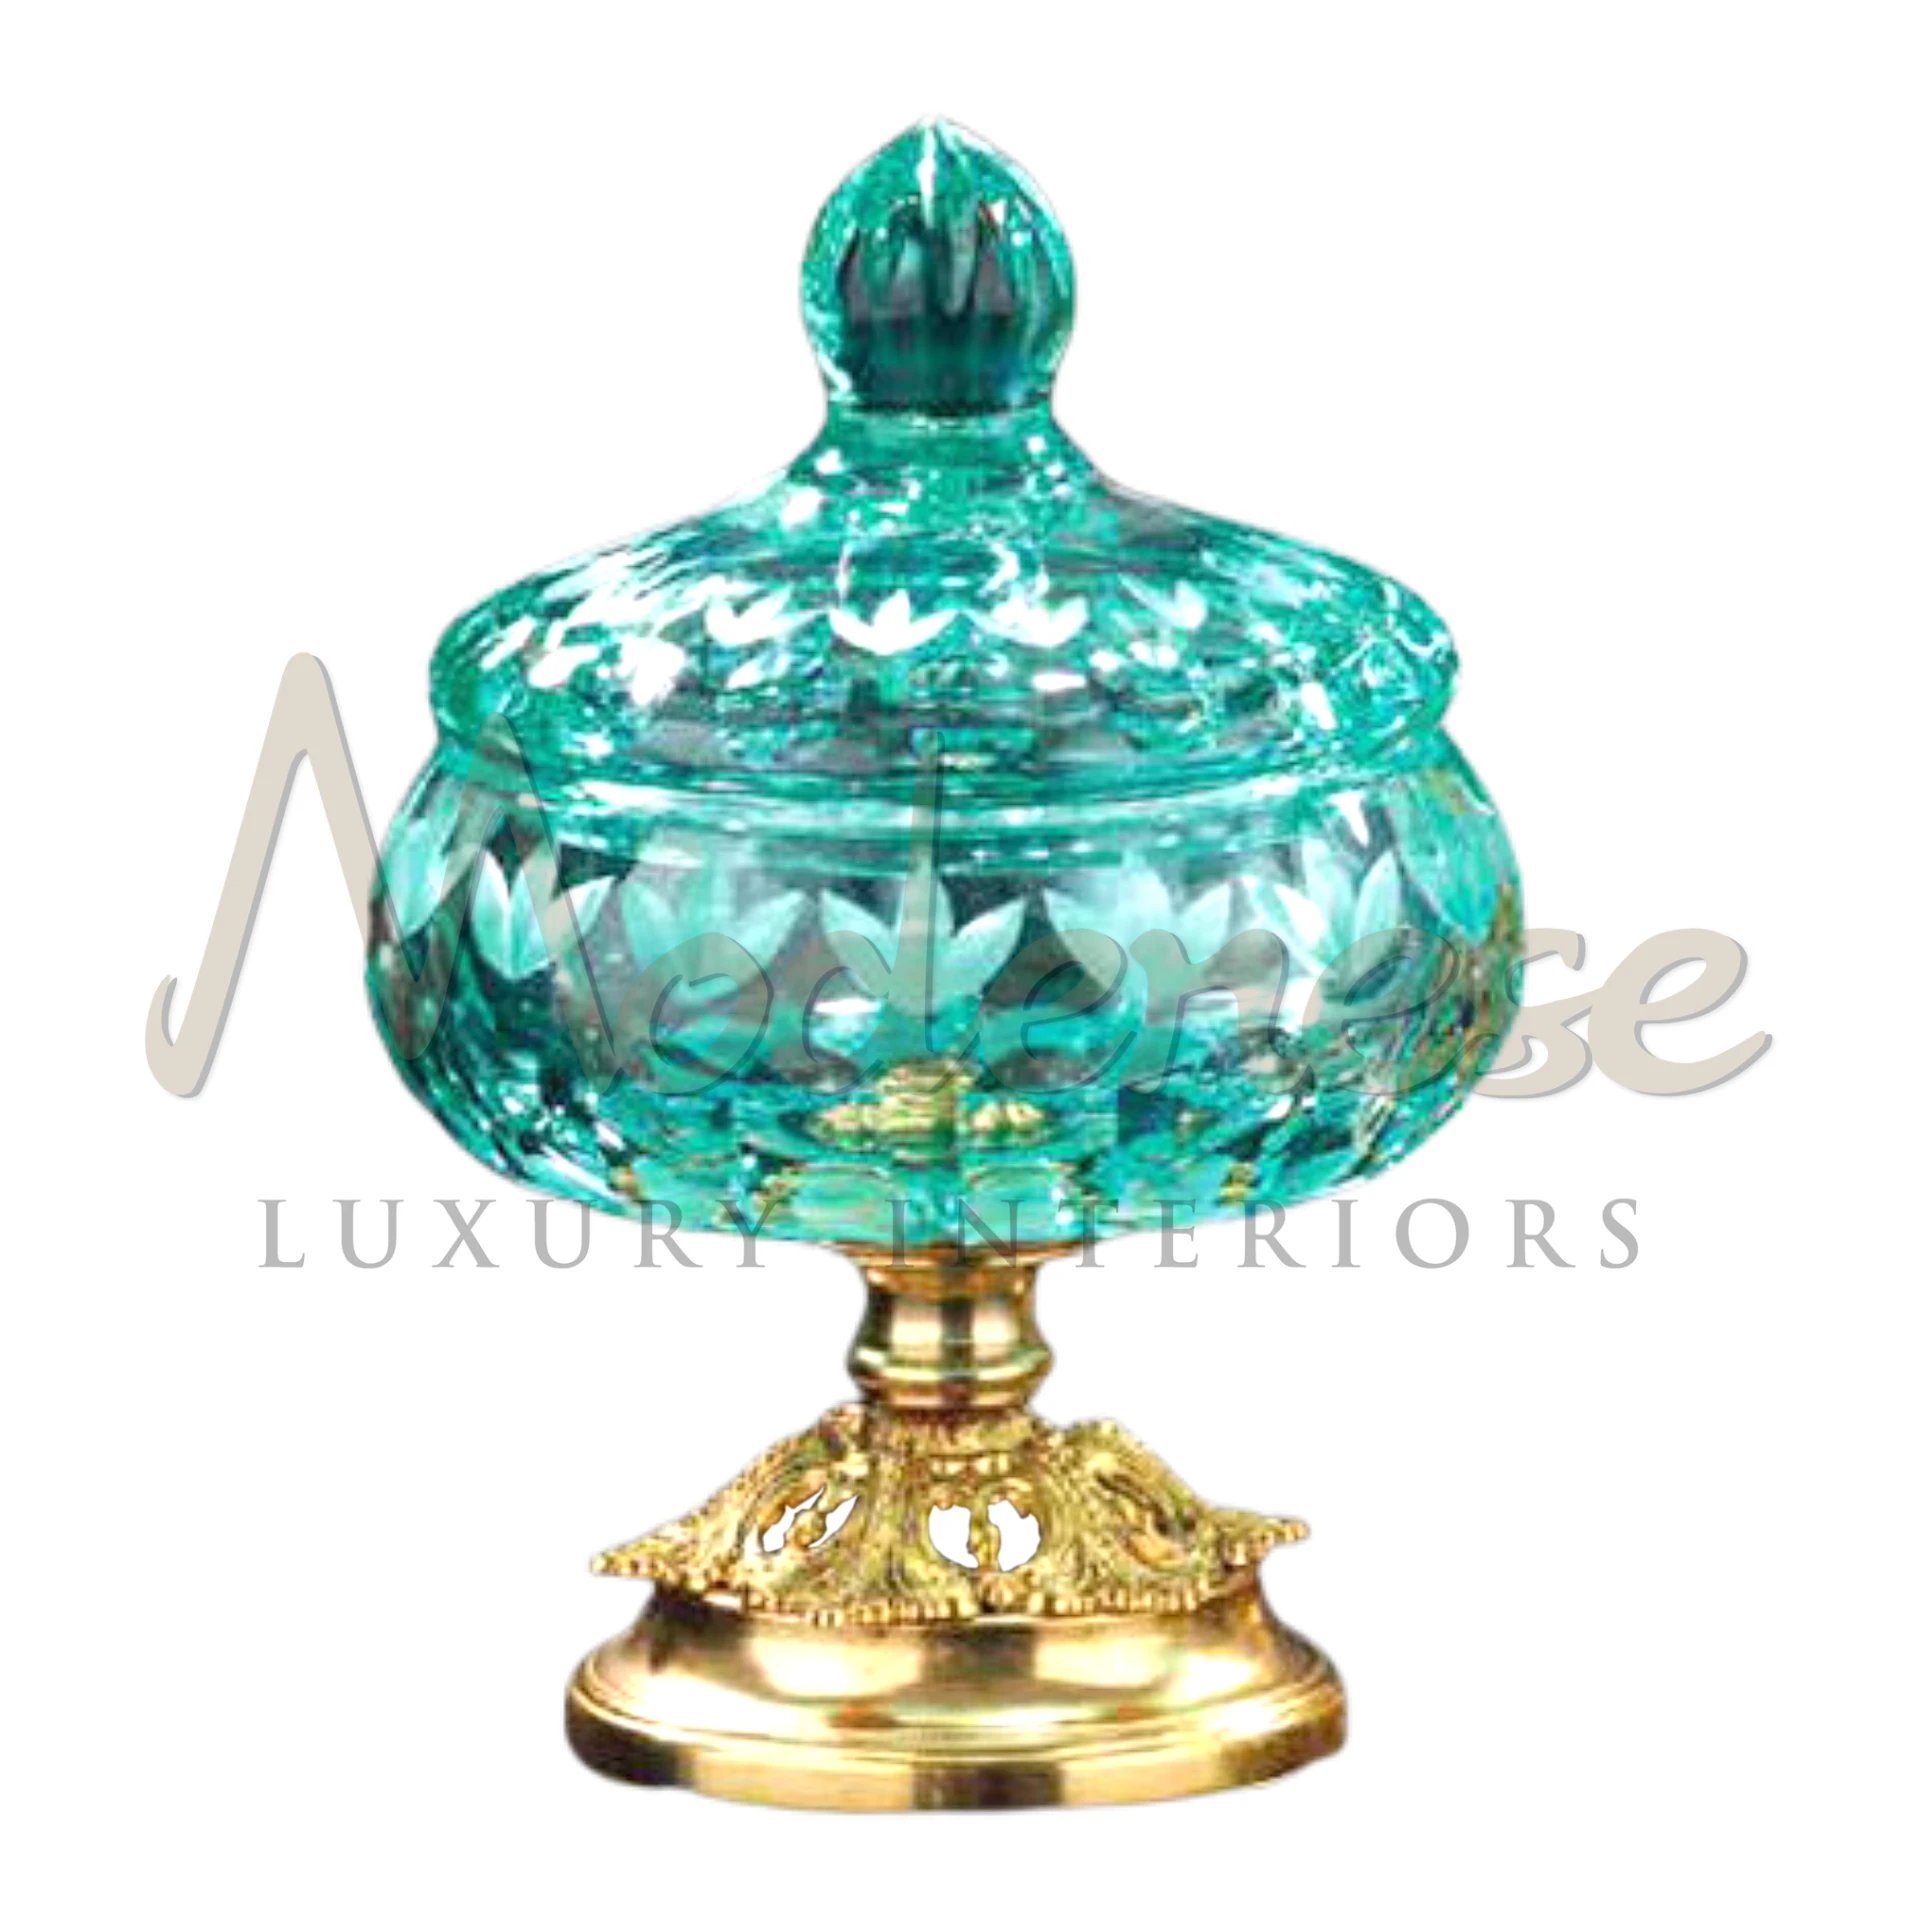 Luxury Turquoise Box, featuring elegant and refined designs in fine porcelain, glass, or crystal, perfect for enhancing luxury and classic interiors.